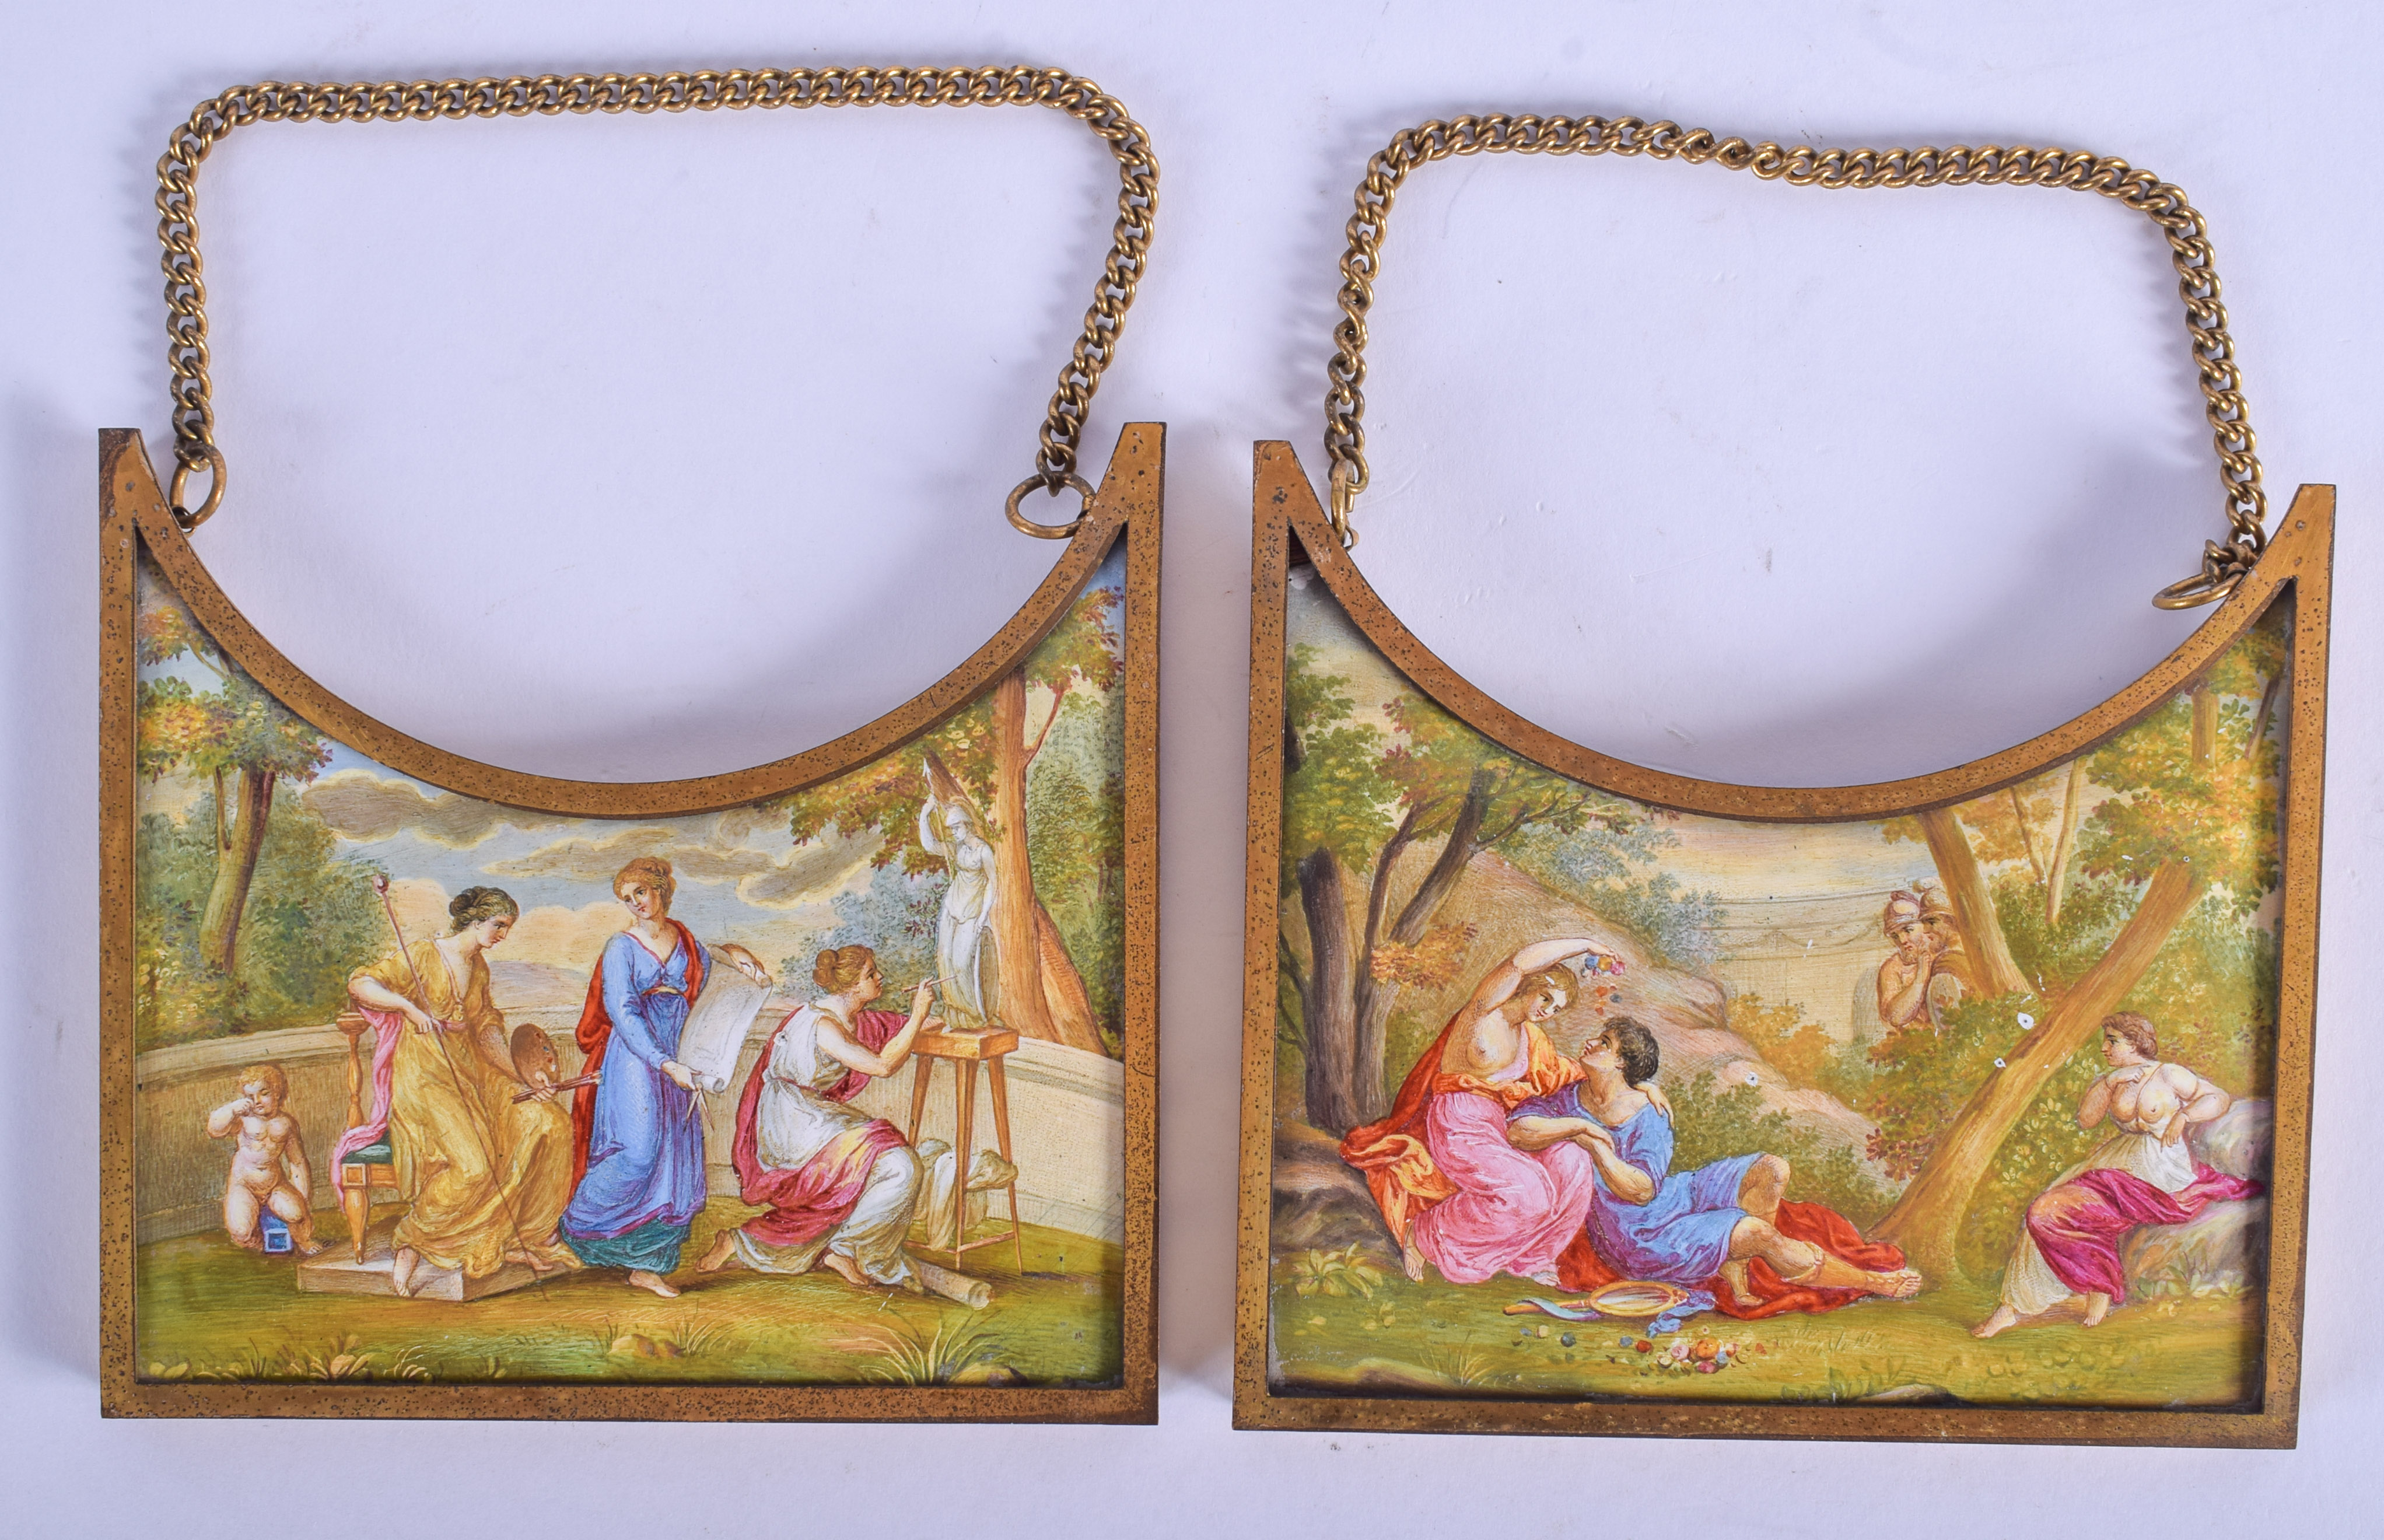 A LARGE PAIR OF EARLY 19TH CENTURY AUSTRIAN VIENNESE ENAMEL PLAQUES painted with classical scenes. 1